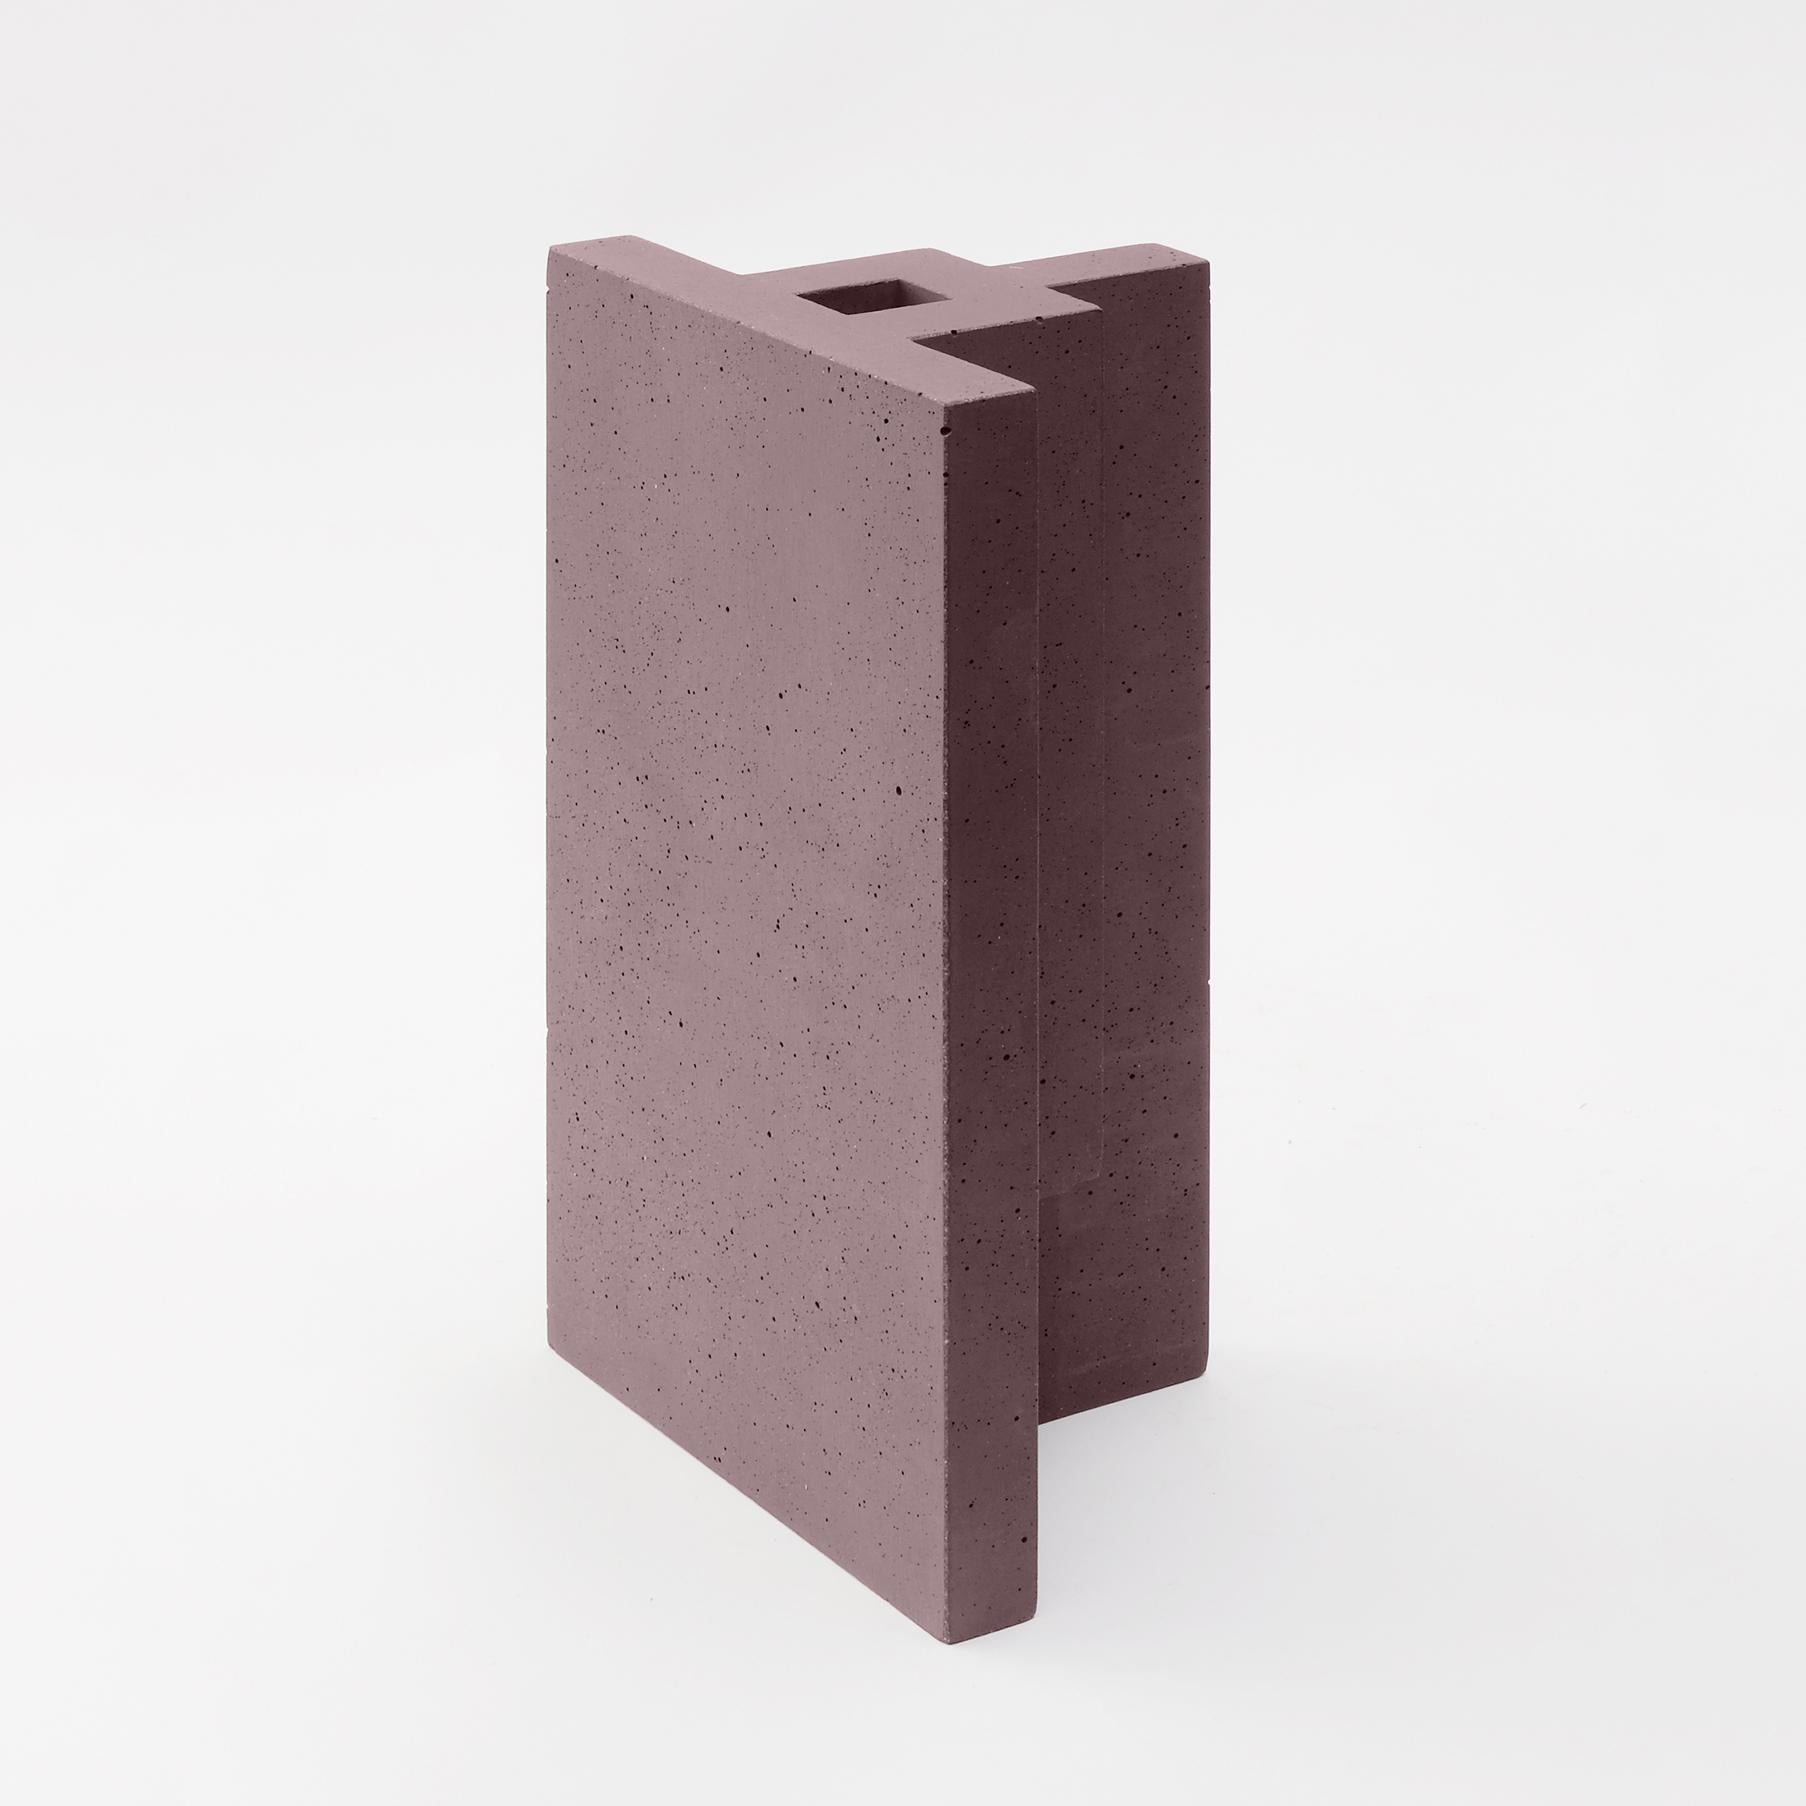 Chandigarh I - Marsala Brown - Design Vase Paolo Giordano Cement Cast
Chandigarh I - Marsala Brown

Chandigarh is a collection of vases inspired by the homonym city designed by Le Corbusier, who imagined and created it from nothing in India. The